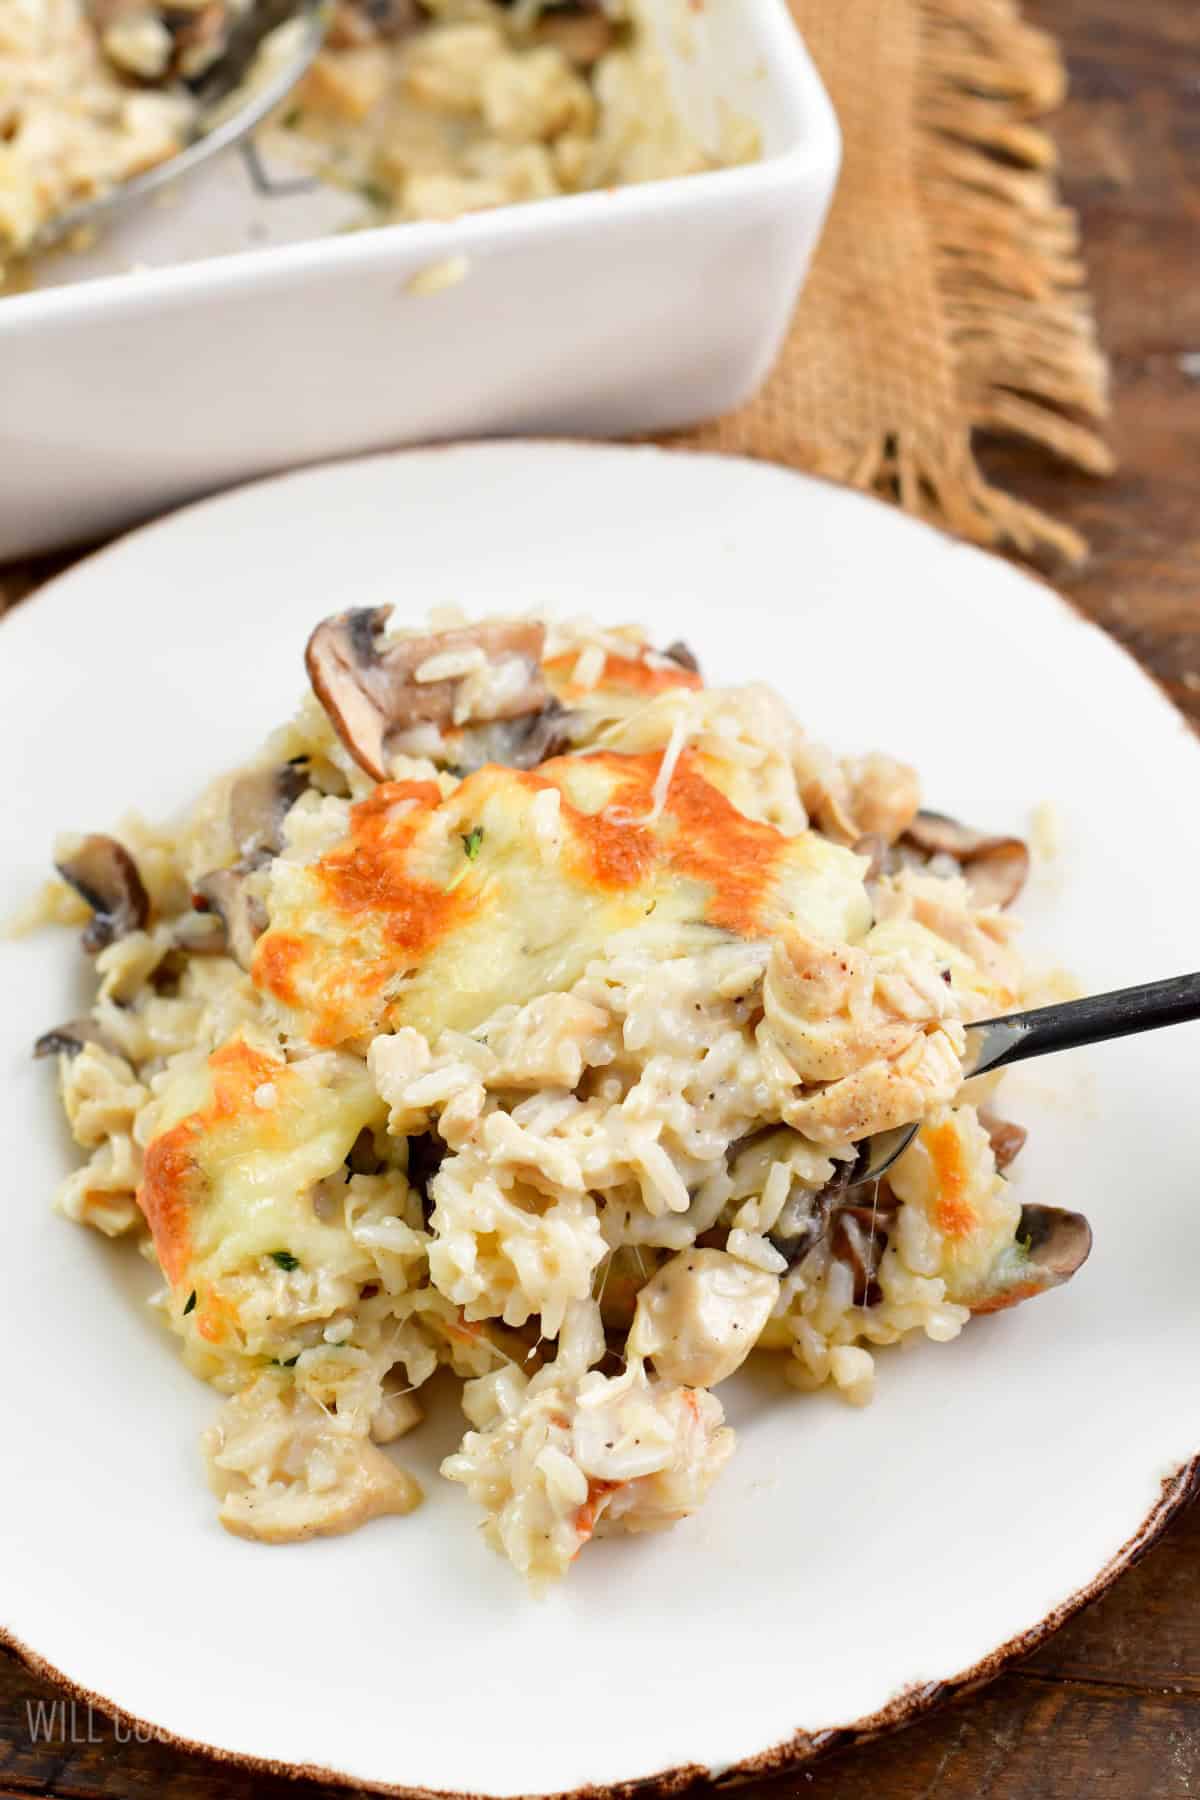 Creamy chicken rice casserole on a plate with a fork.